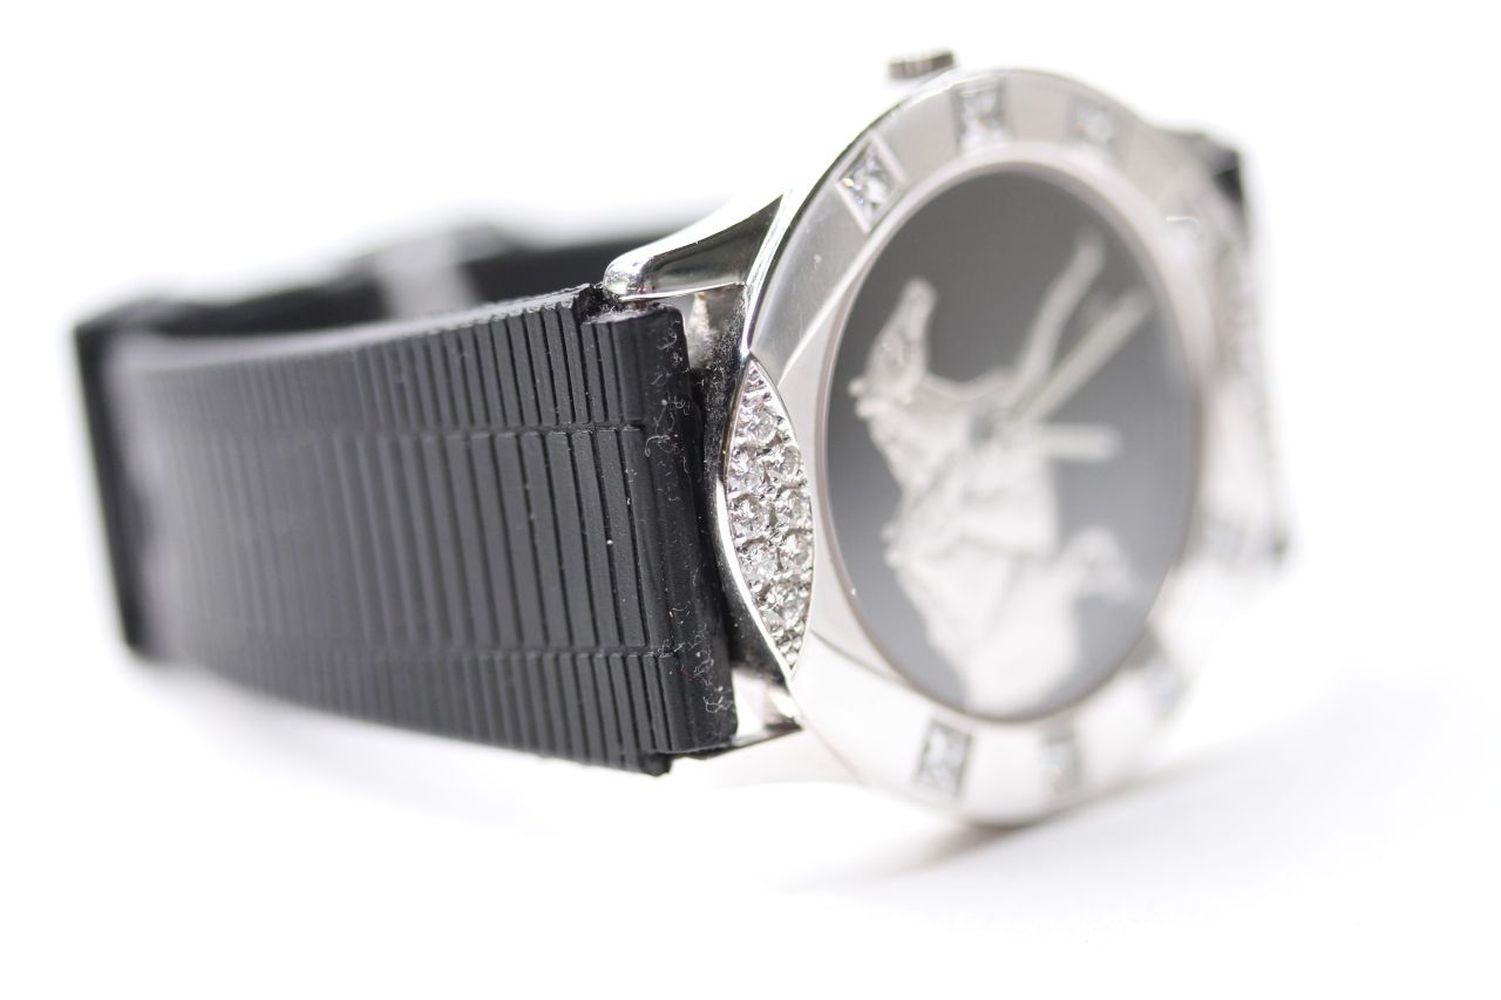 18CT CORUM FOR ASPREY DIAMOND BEZEL WRIST WATCH, black circular dial with two galloping horses, - Image 2 of 4